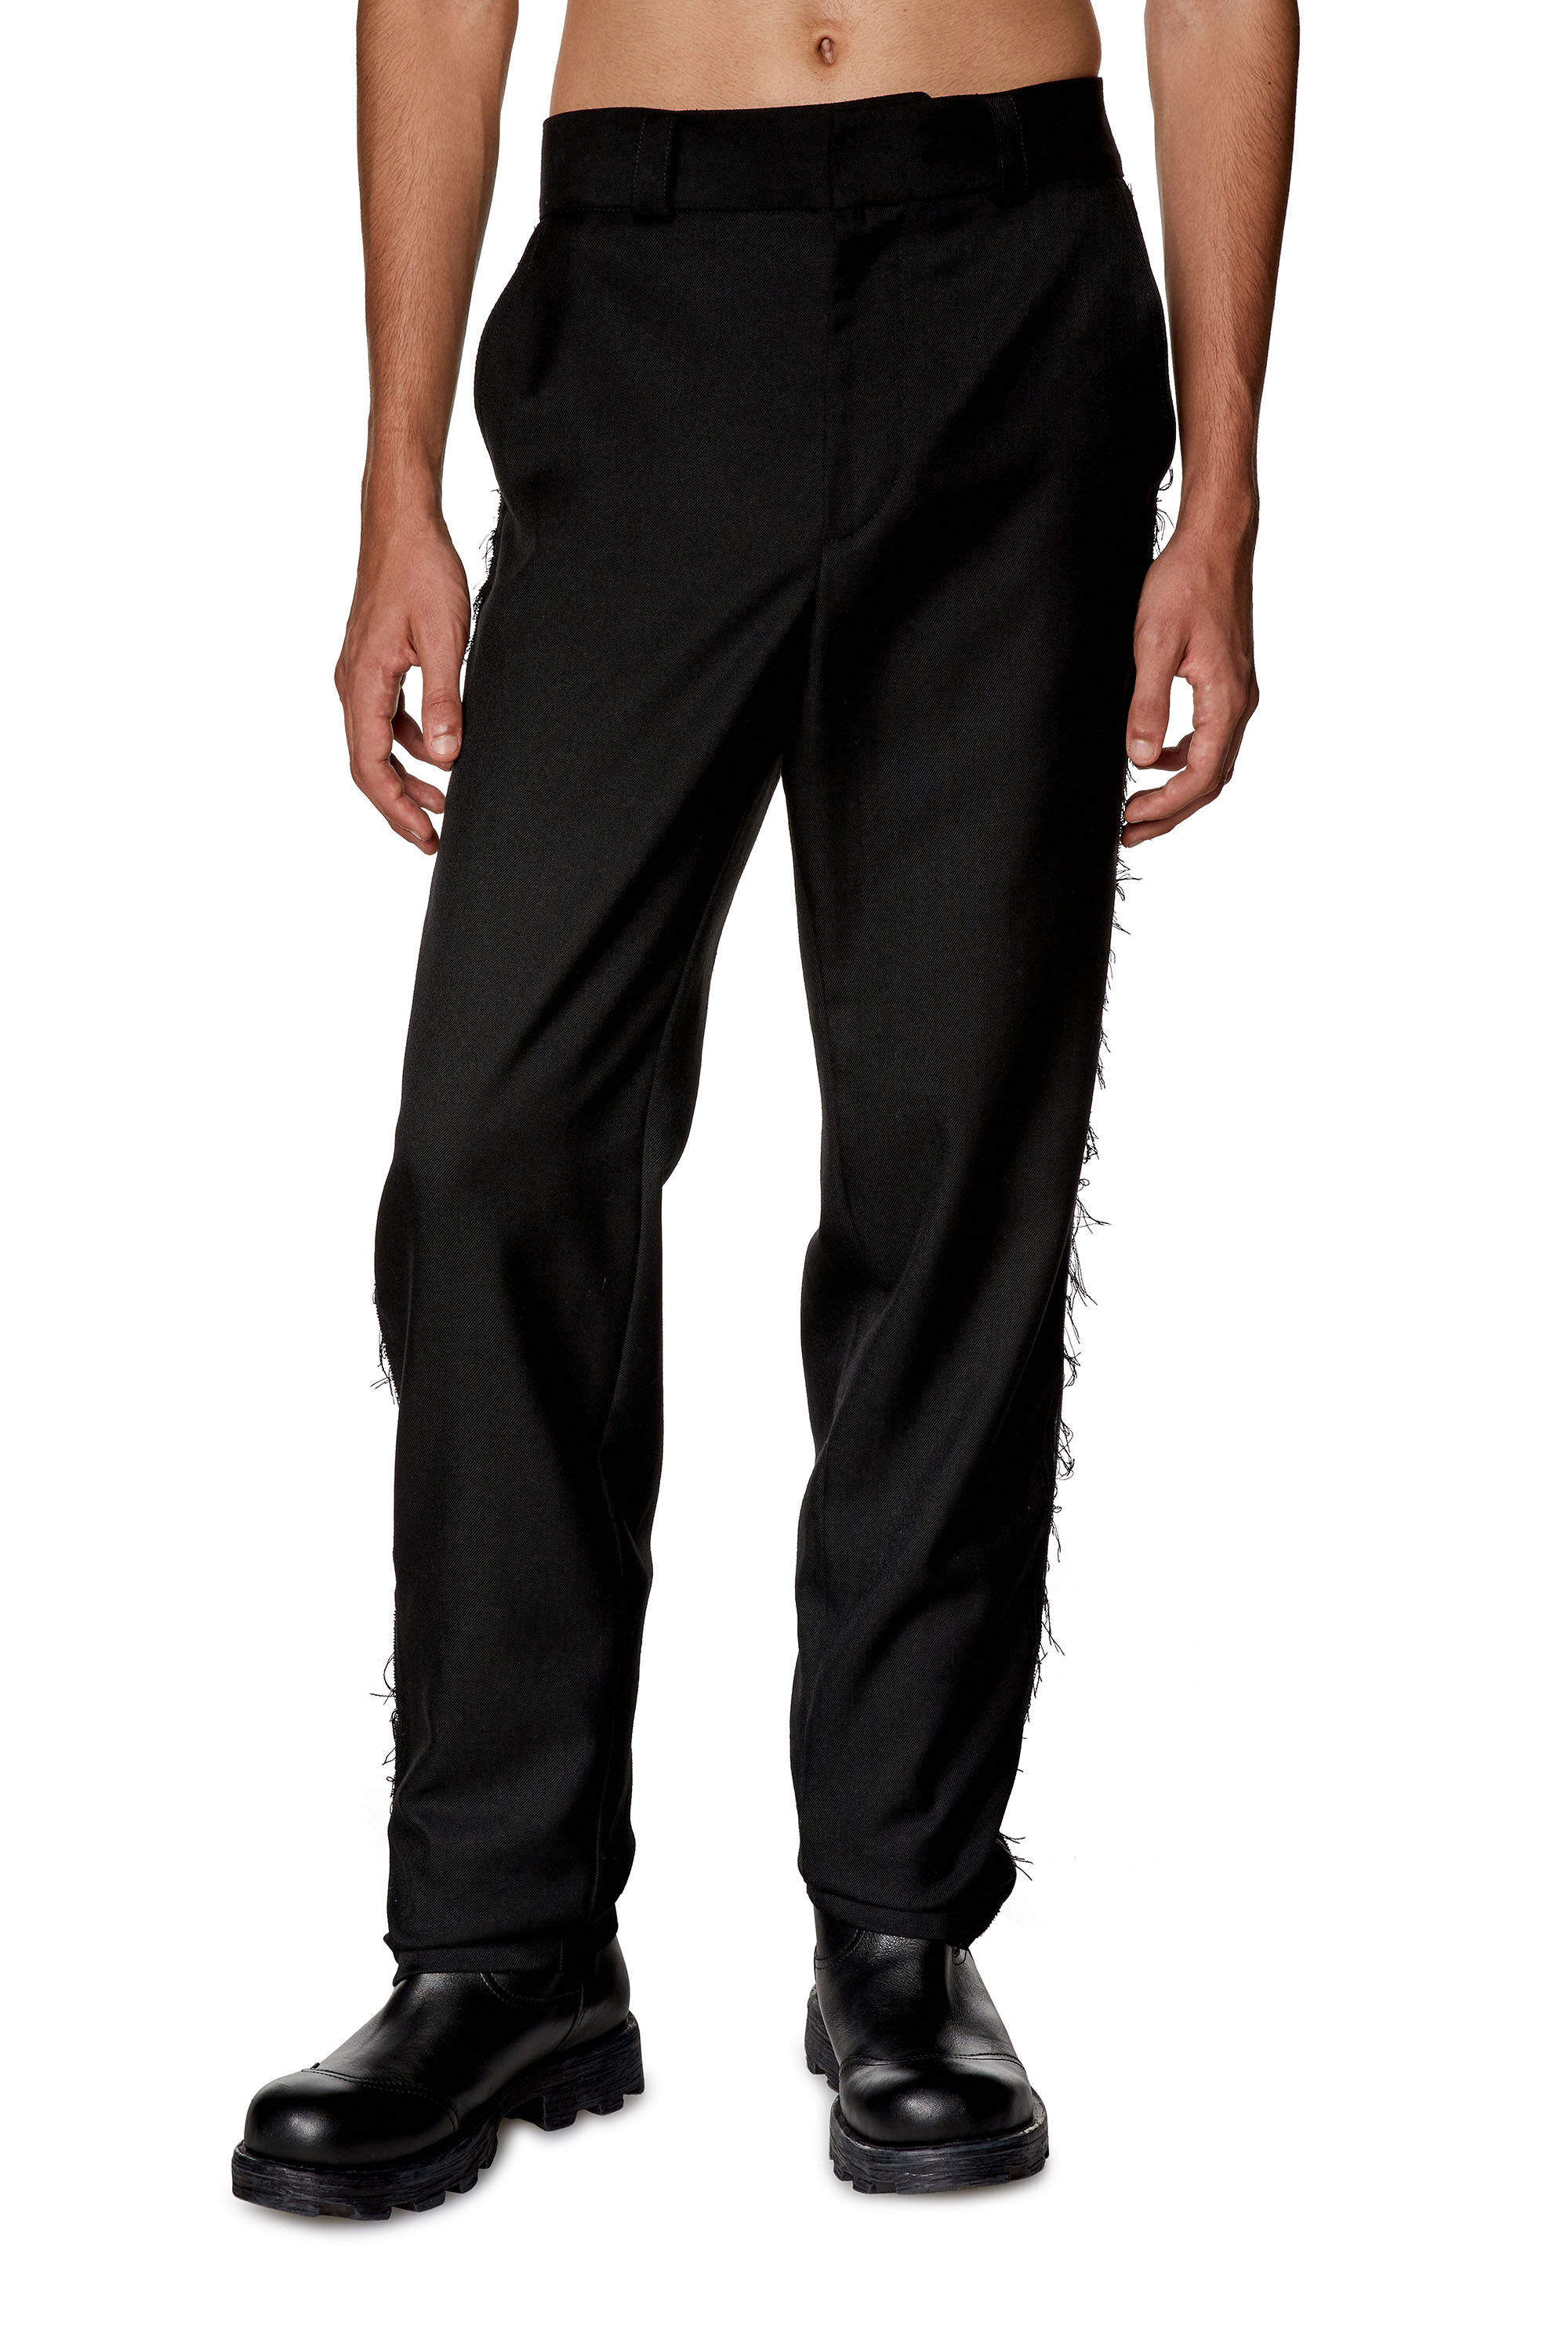 Men's Cool wool pants with denim inserts